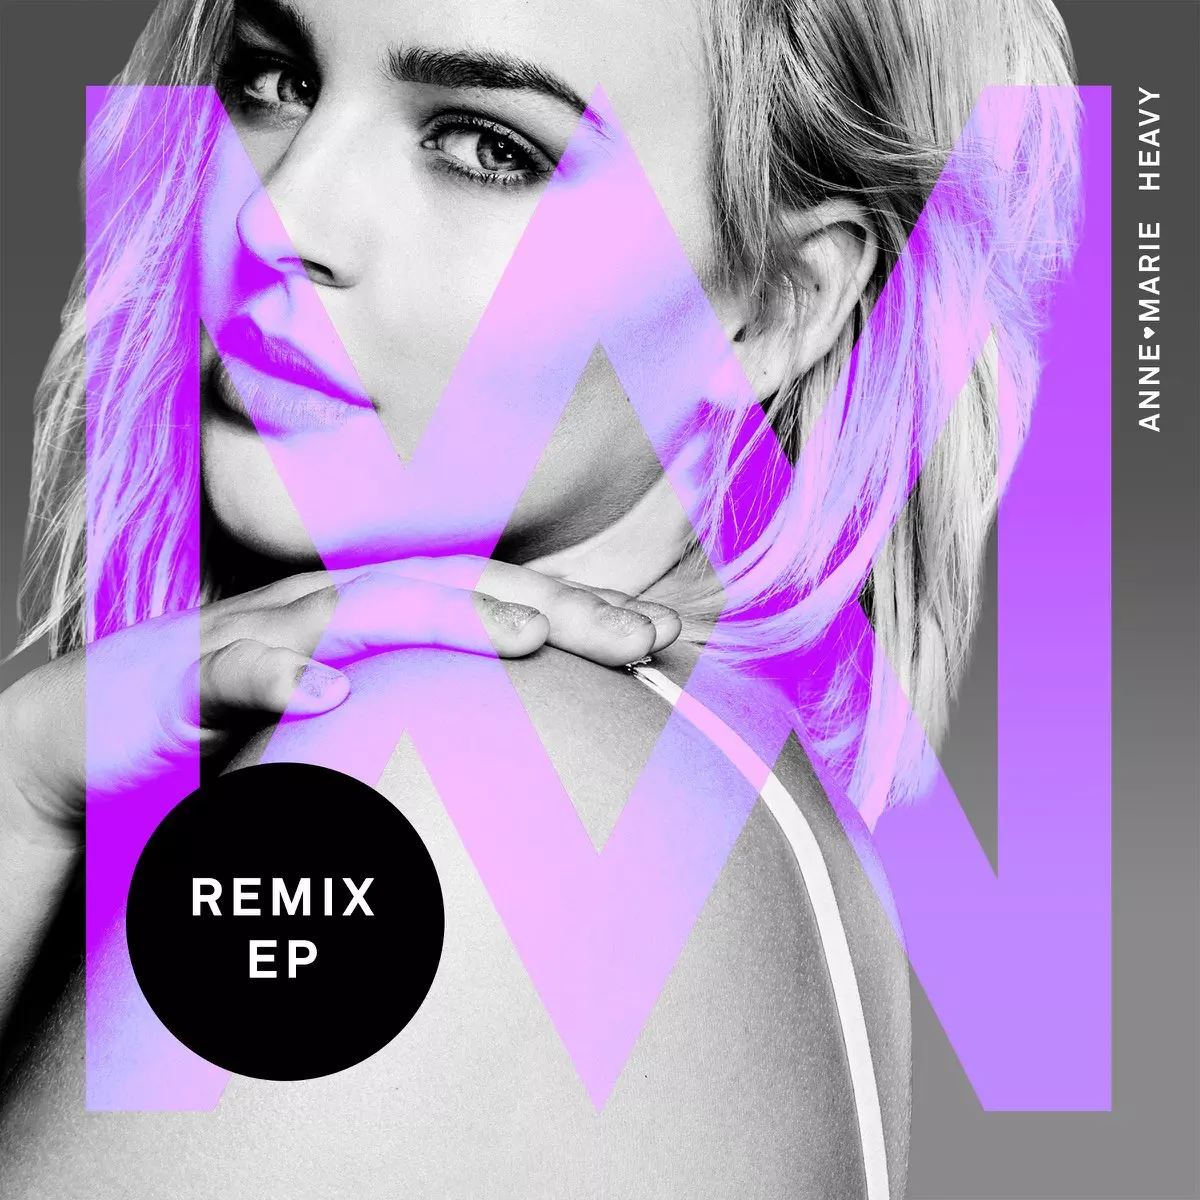 Heavy (Remixes) - EP by Anne-Marie on Apple Music